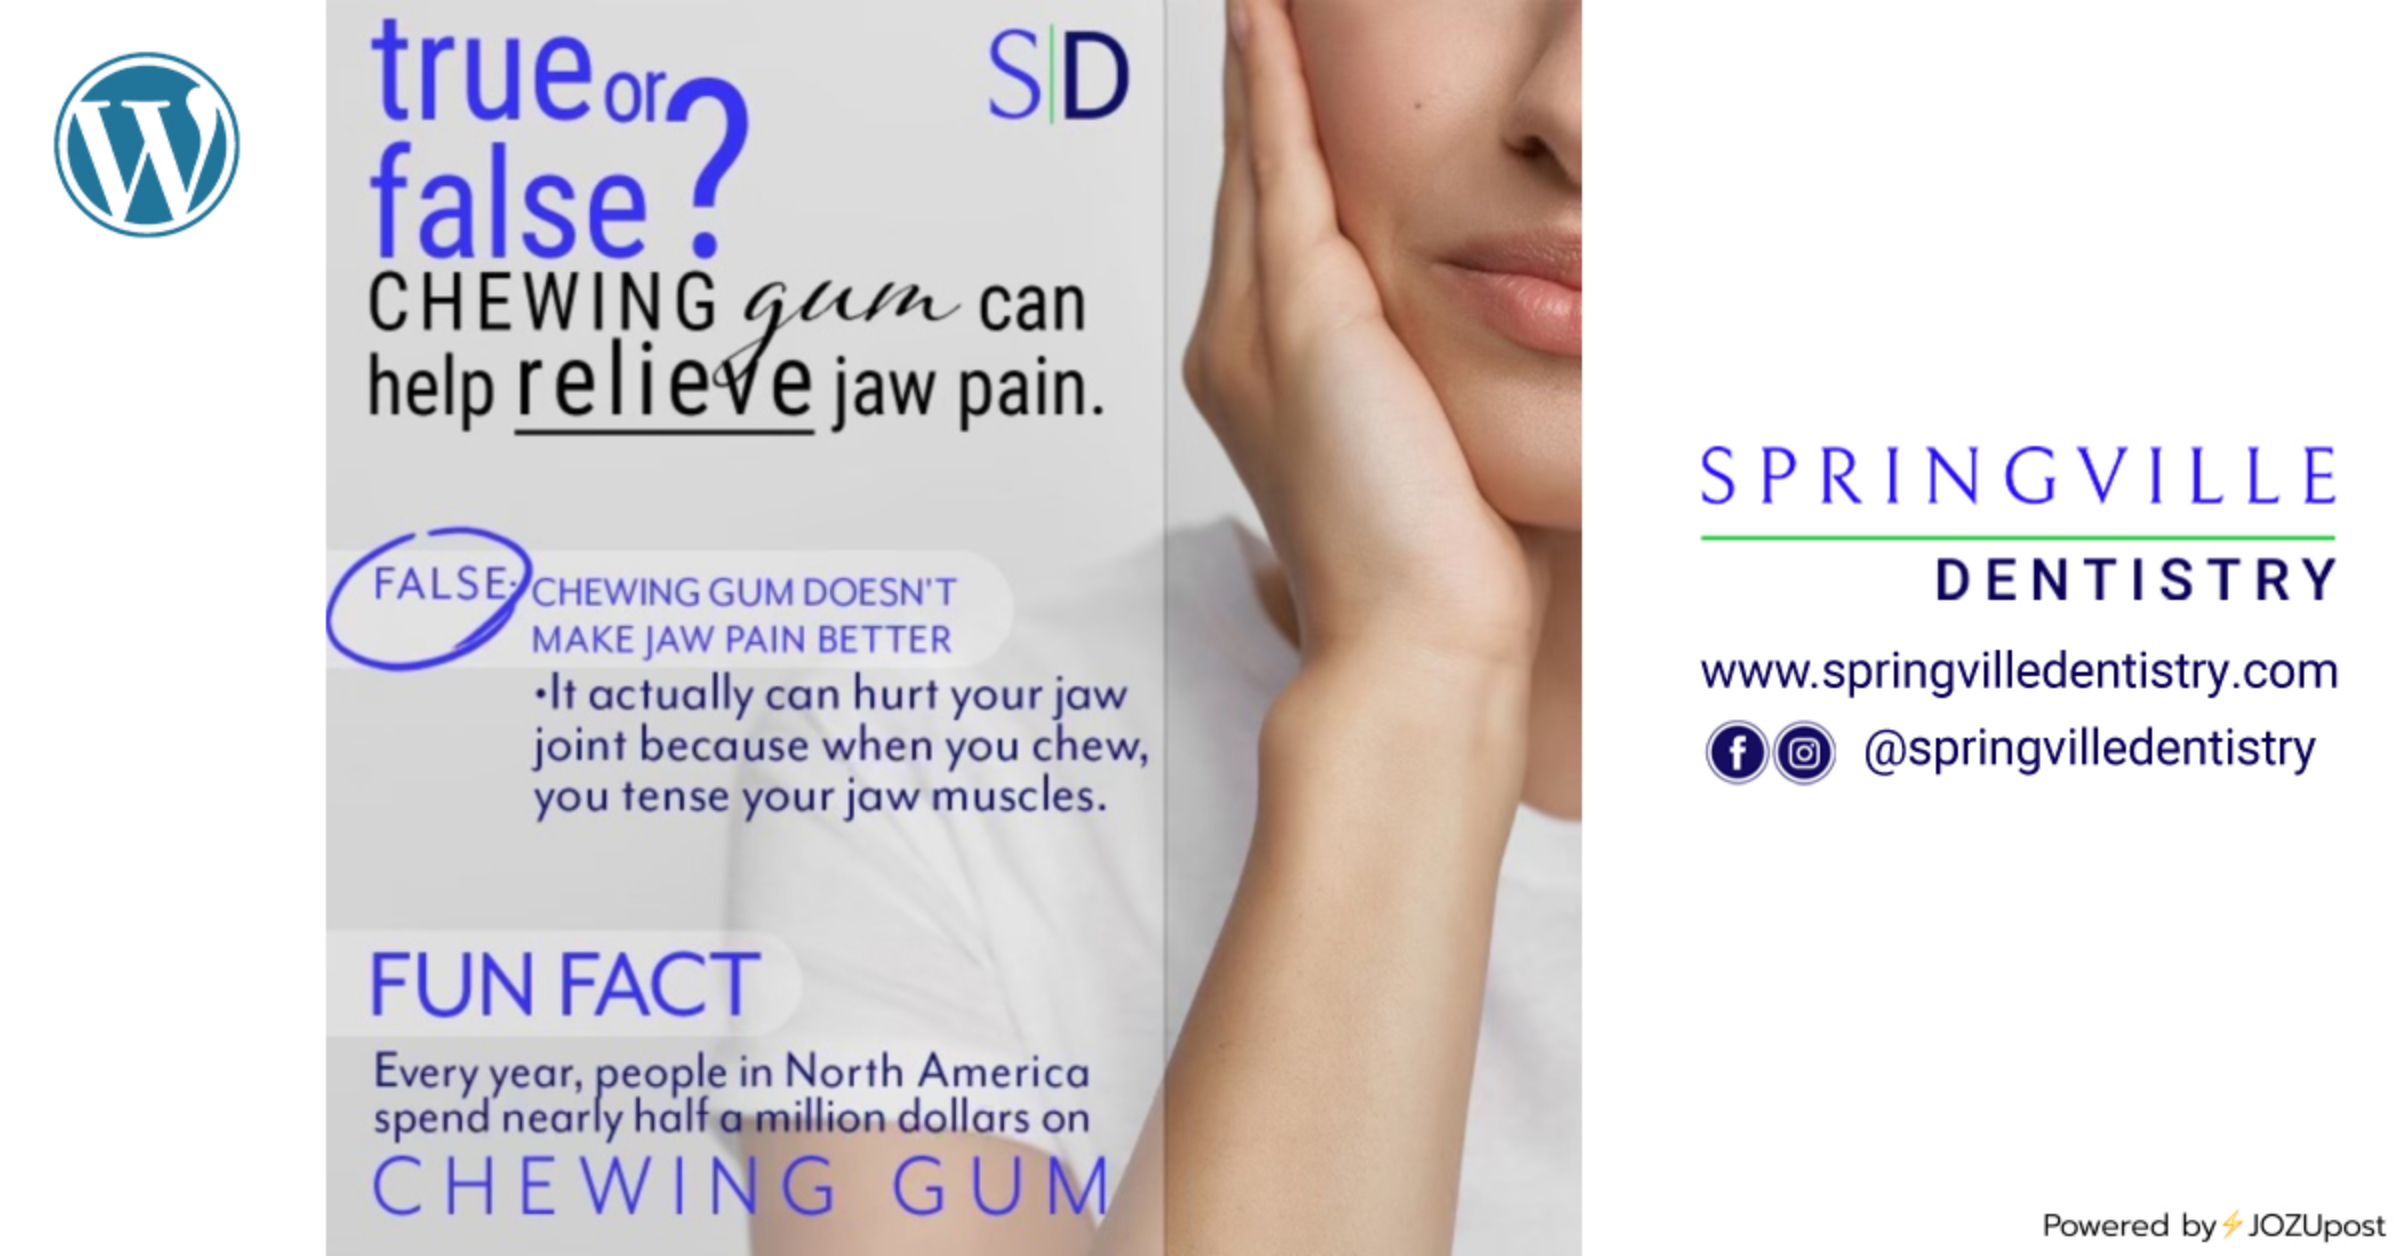 Can chewing gum relieve jaw pain? – Springville Dentistry